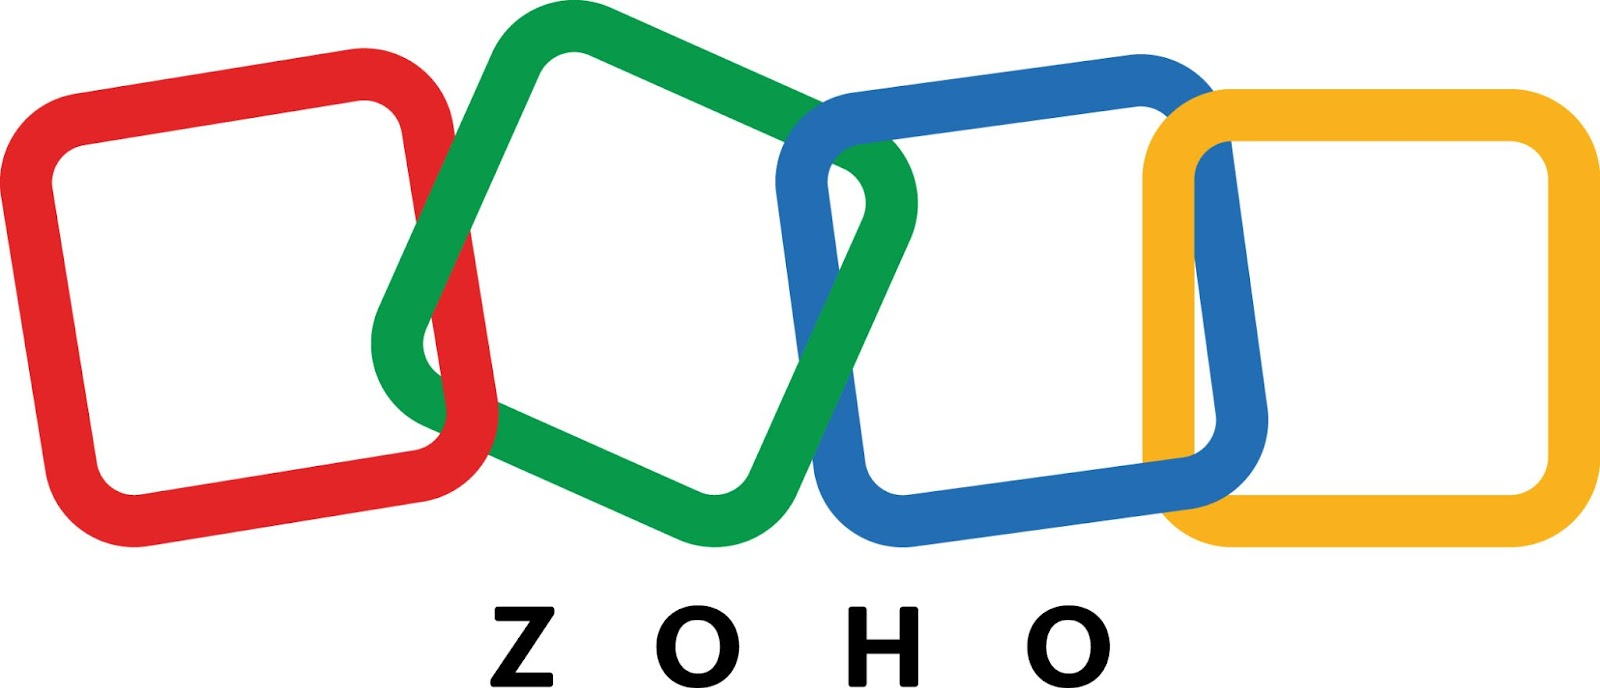 Zoho integrates Chatgpt with Zia, enhancing the capabilities of generative AI